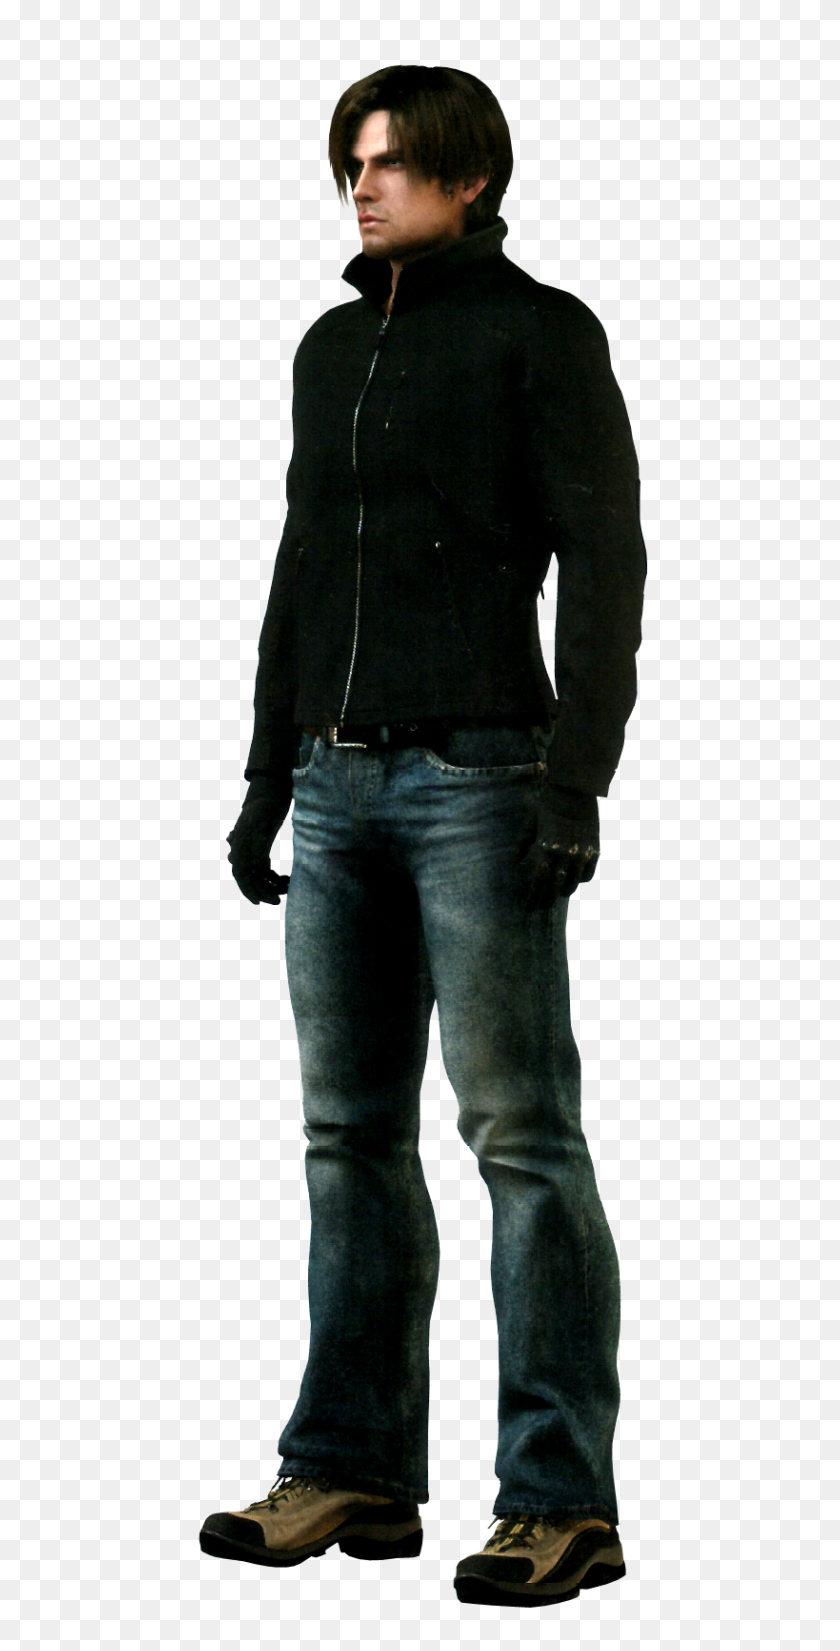 819x1671 Resident Evil Png Transparent Images, Pictures, Photos Png Arts - Resident Evil PNG